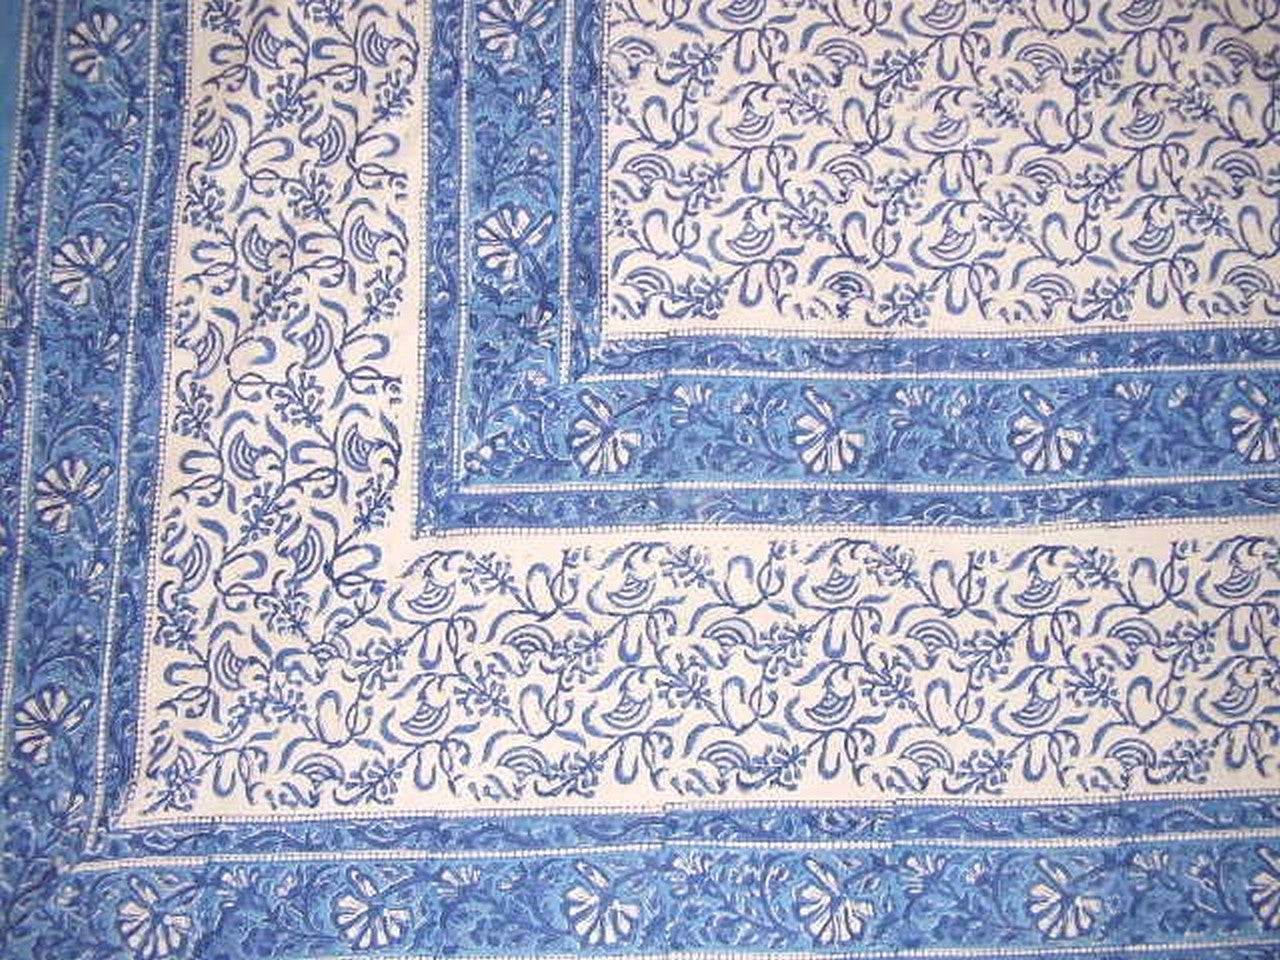 Rajasthan Block Print Tapestry Cotton Bedspread 108" x 82" Full-Queen Blue